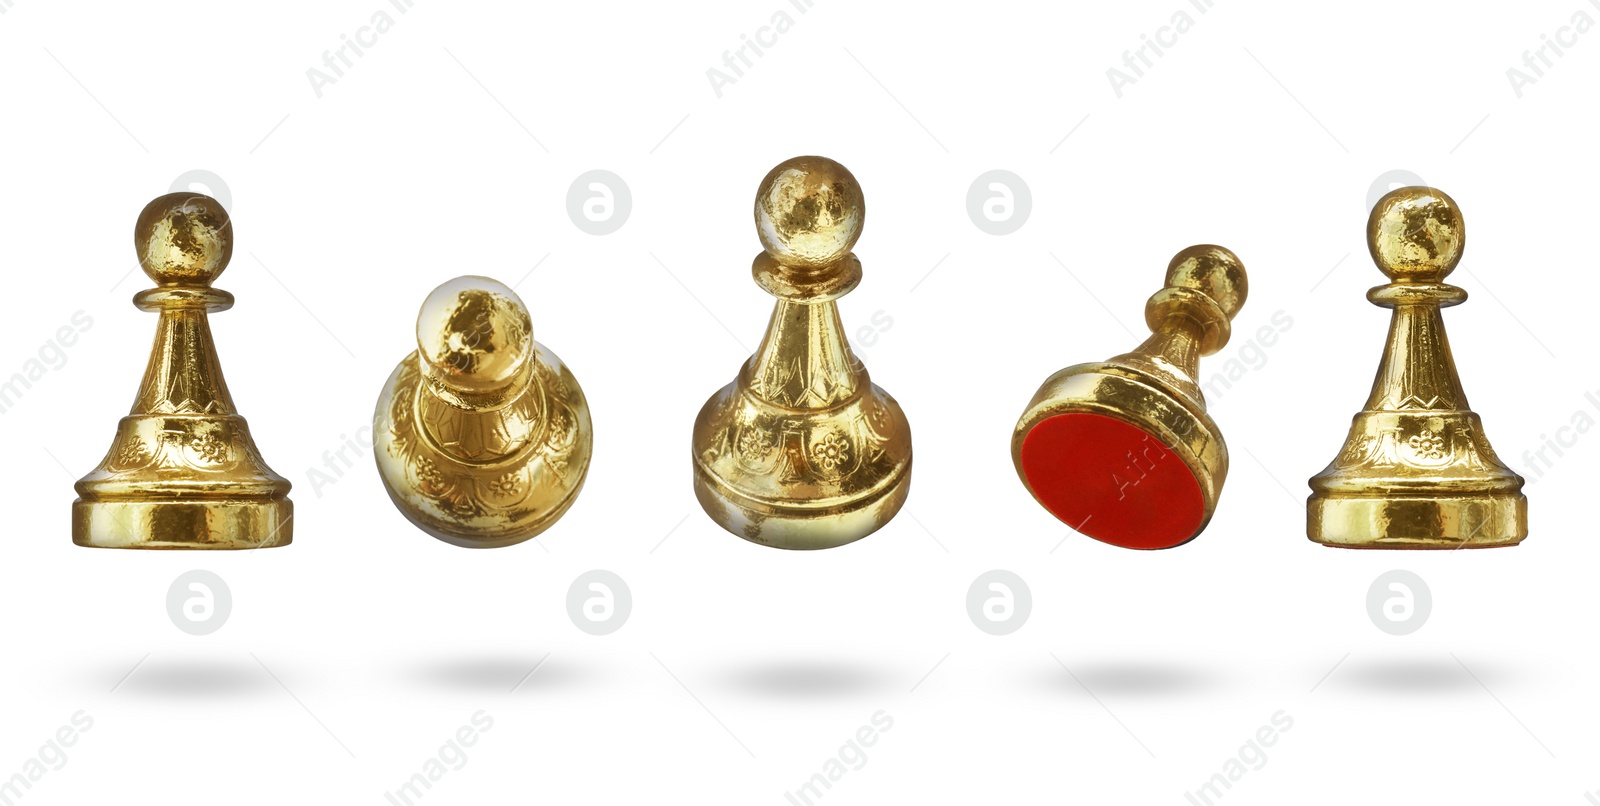 Image of Golden chess pawns in air on white background